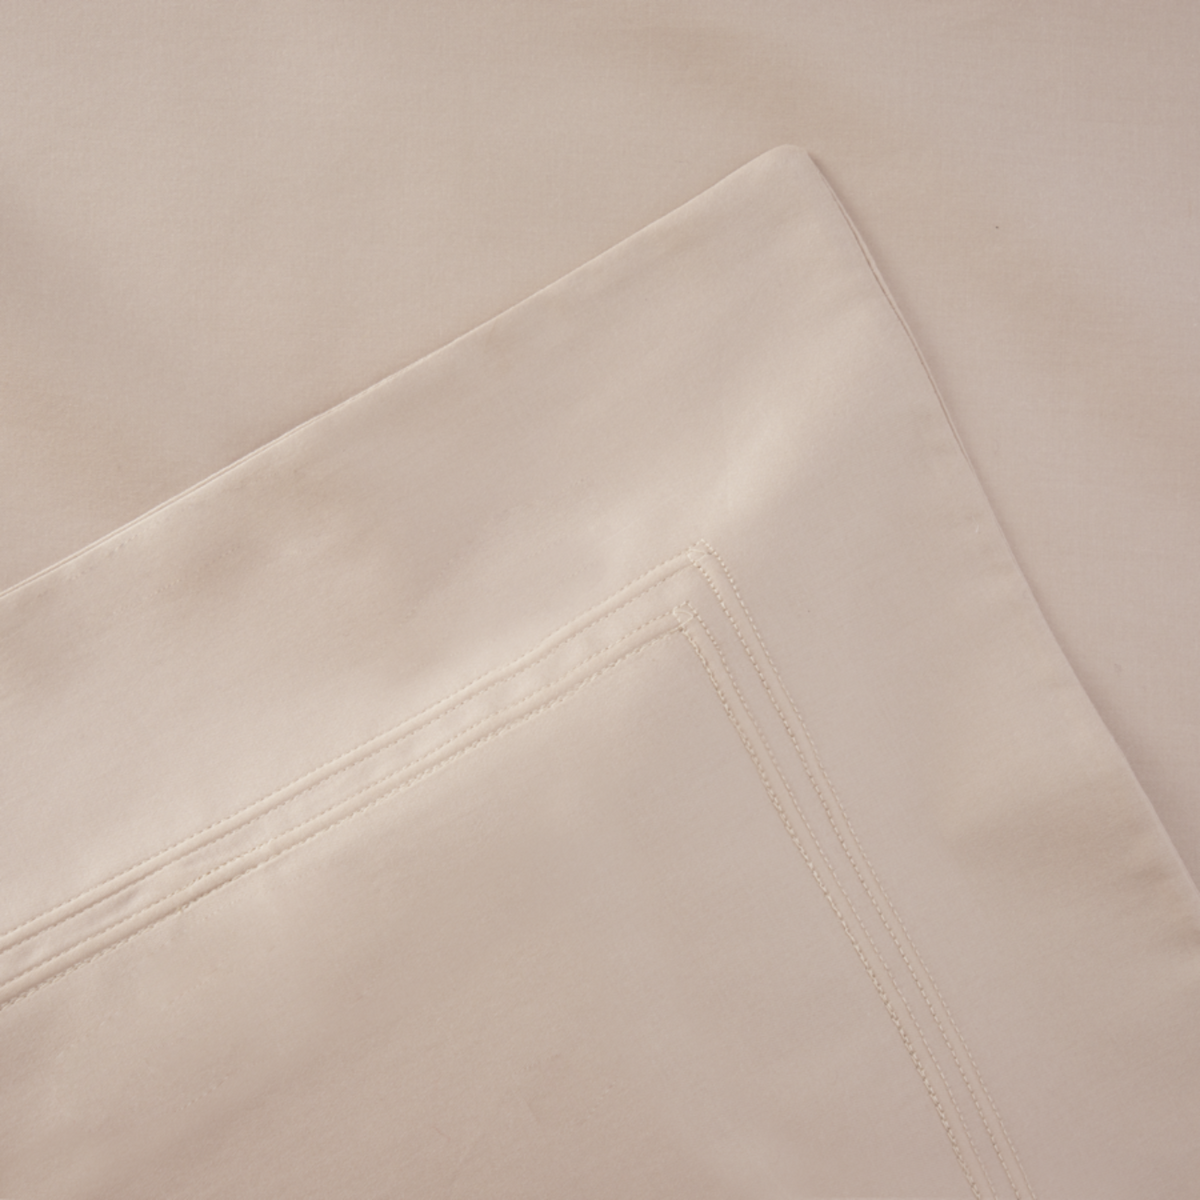 Yves Delorme Triomphe Bedding Swatch Pierre Fine Linens